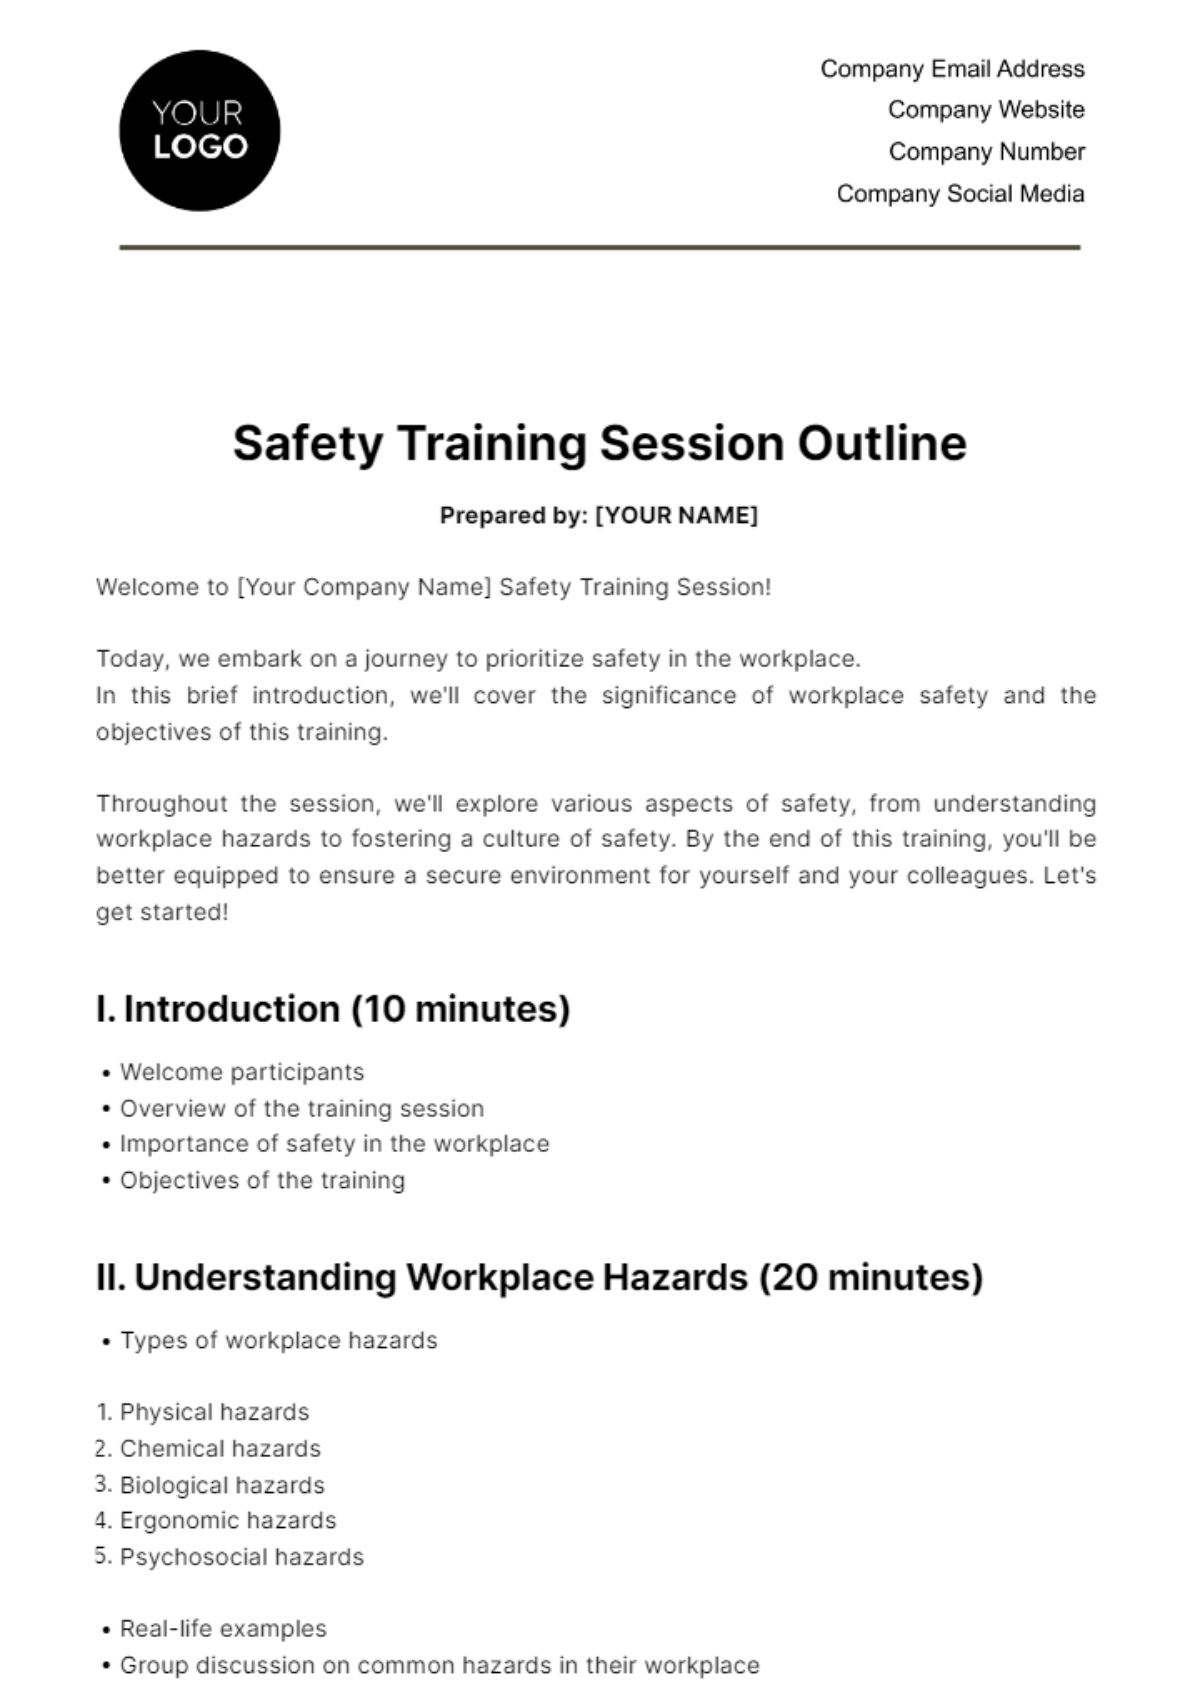 Free Safety Training Session Outline HR Template